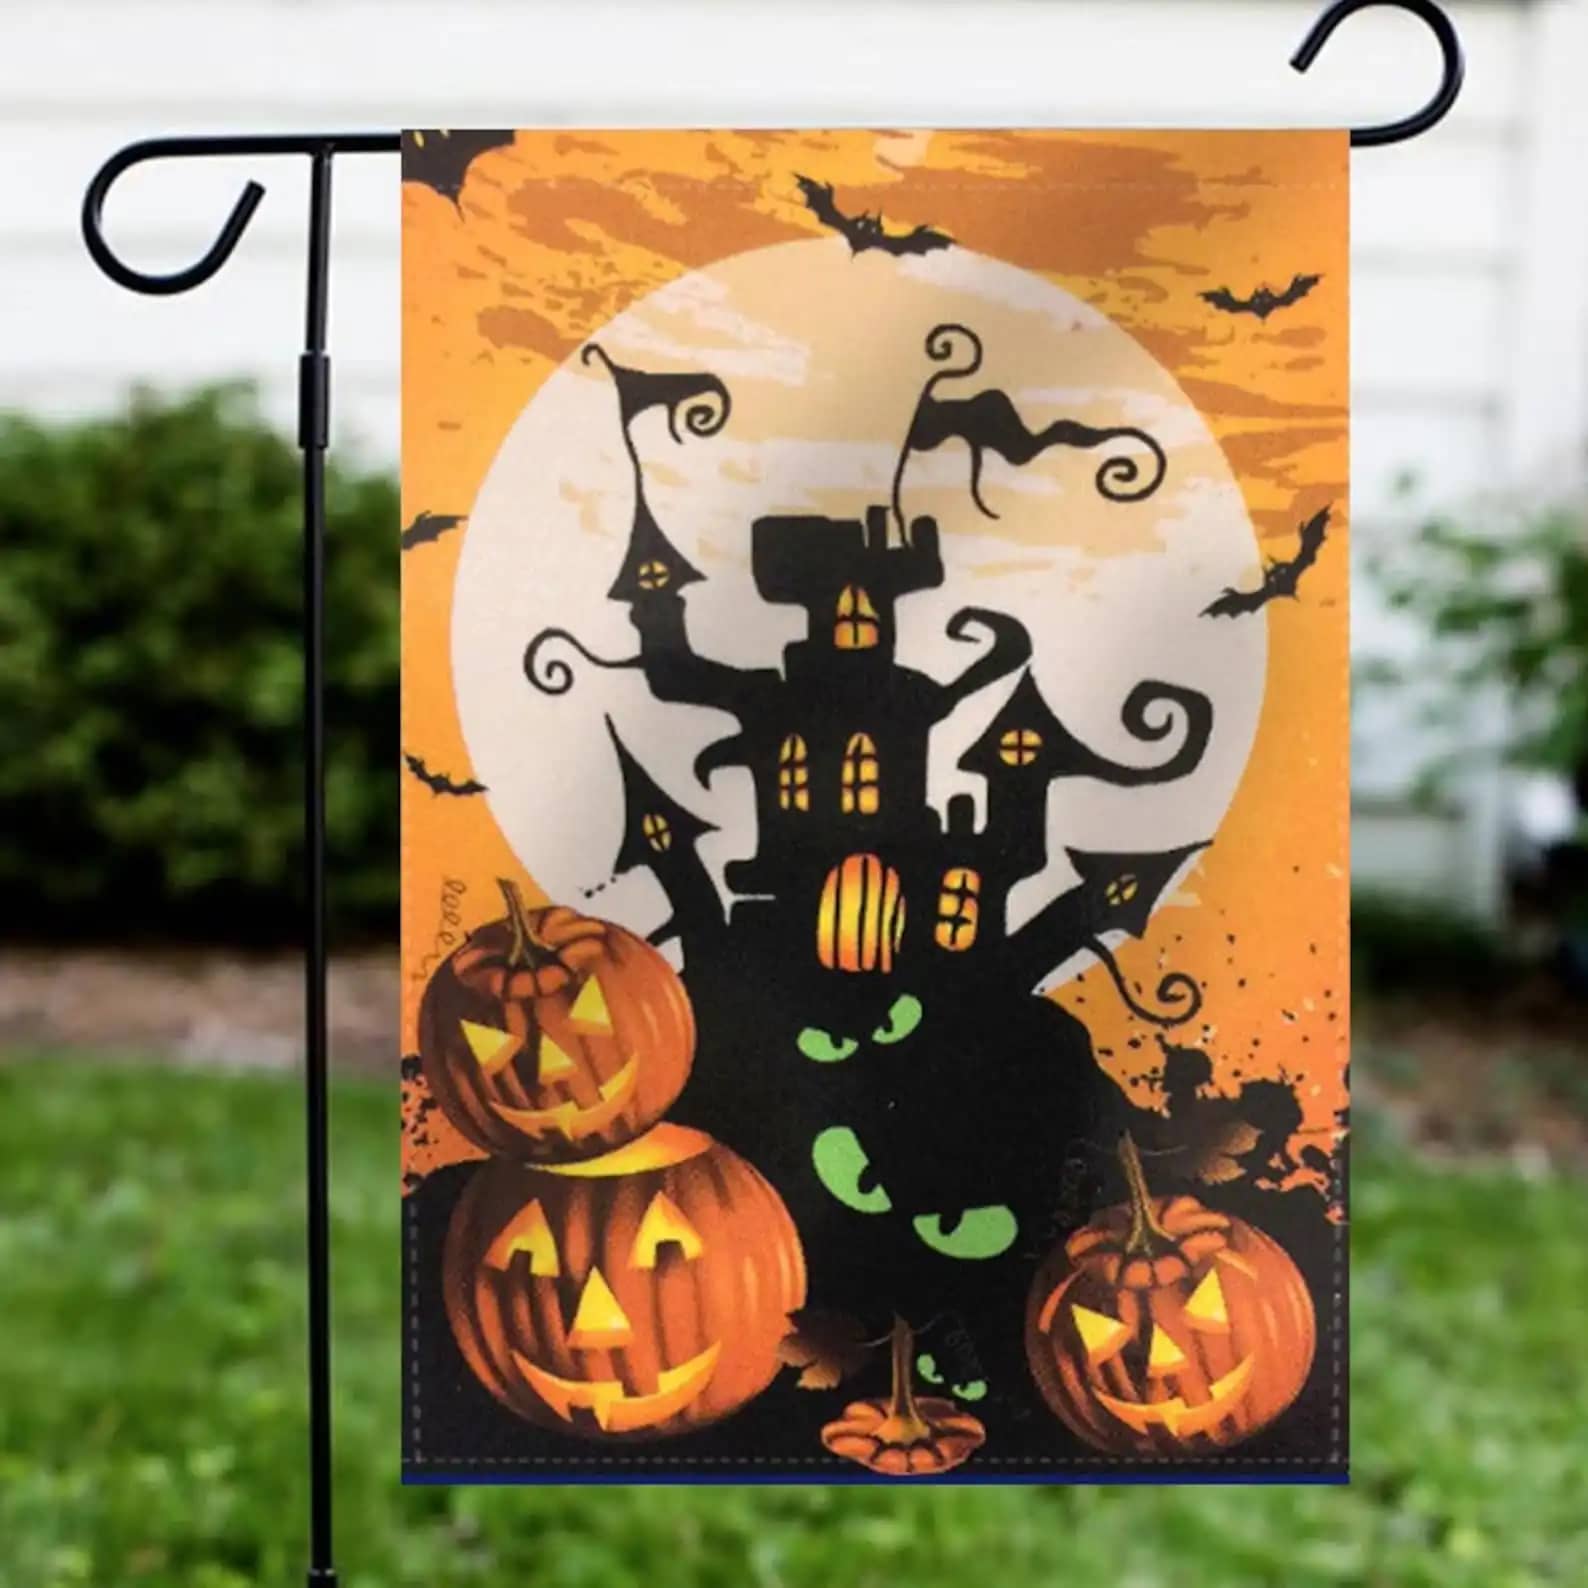 The Castle Halloween Pumpkins Aglow Come See The Show Happy Halloween Decoration Garden Flag